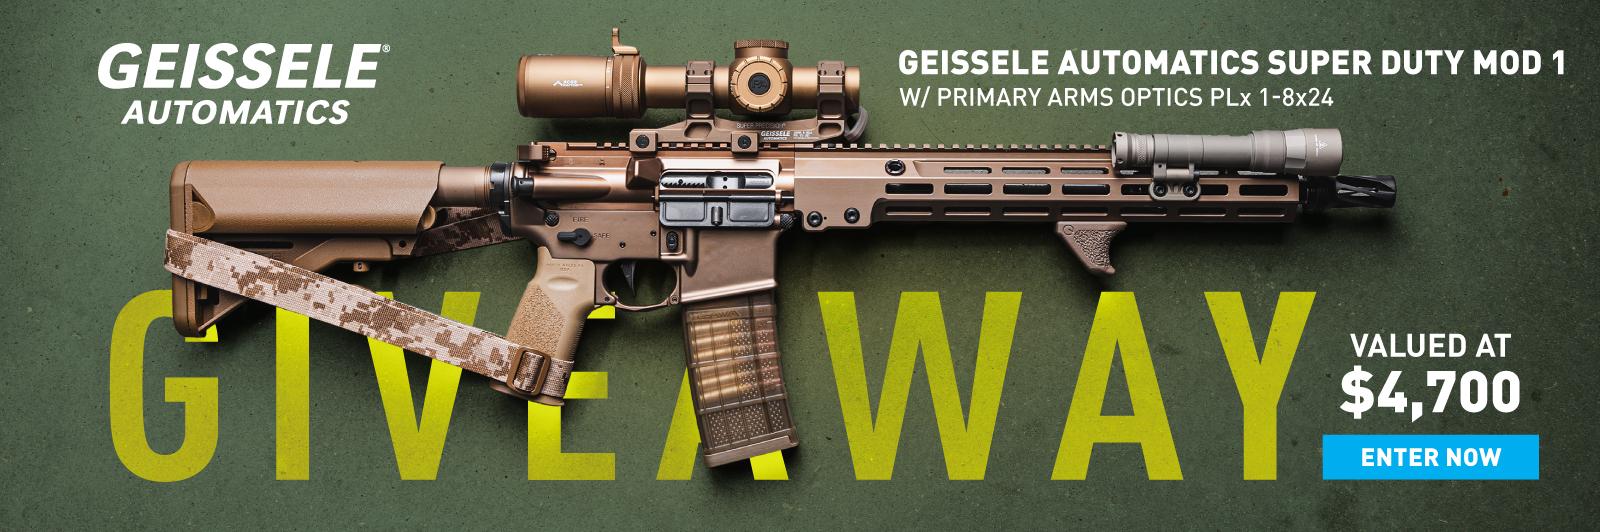 Primary Arms Giveaway